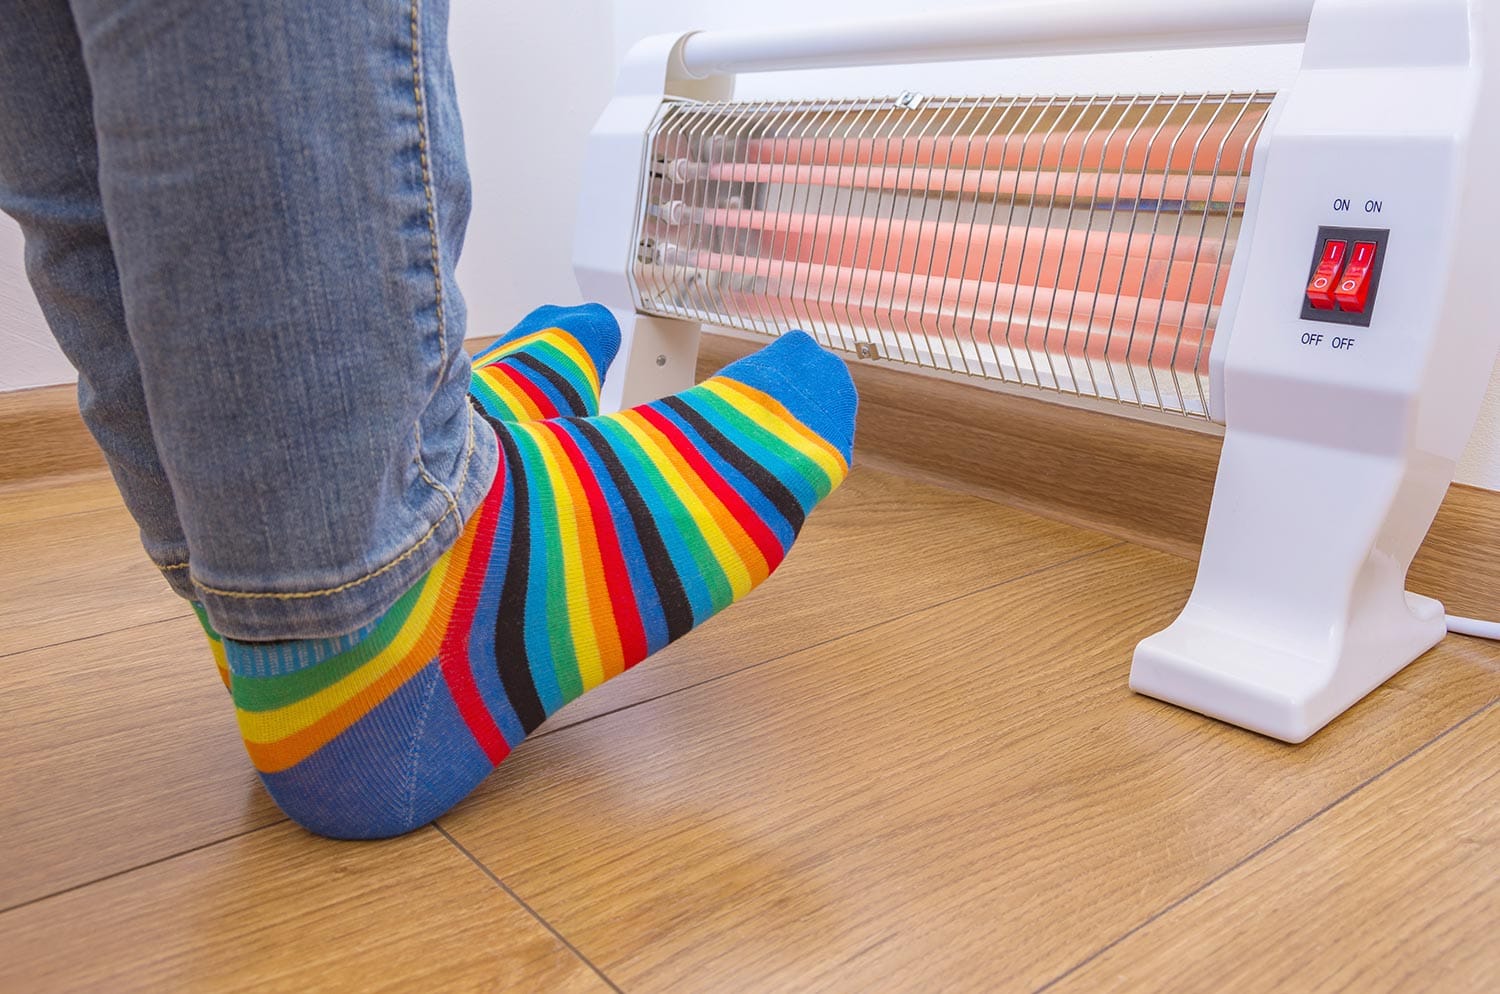 A person wearing bright rainbow-colored socks and warms cold feet near an electric heater